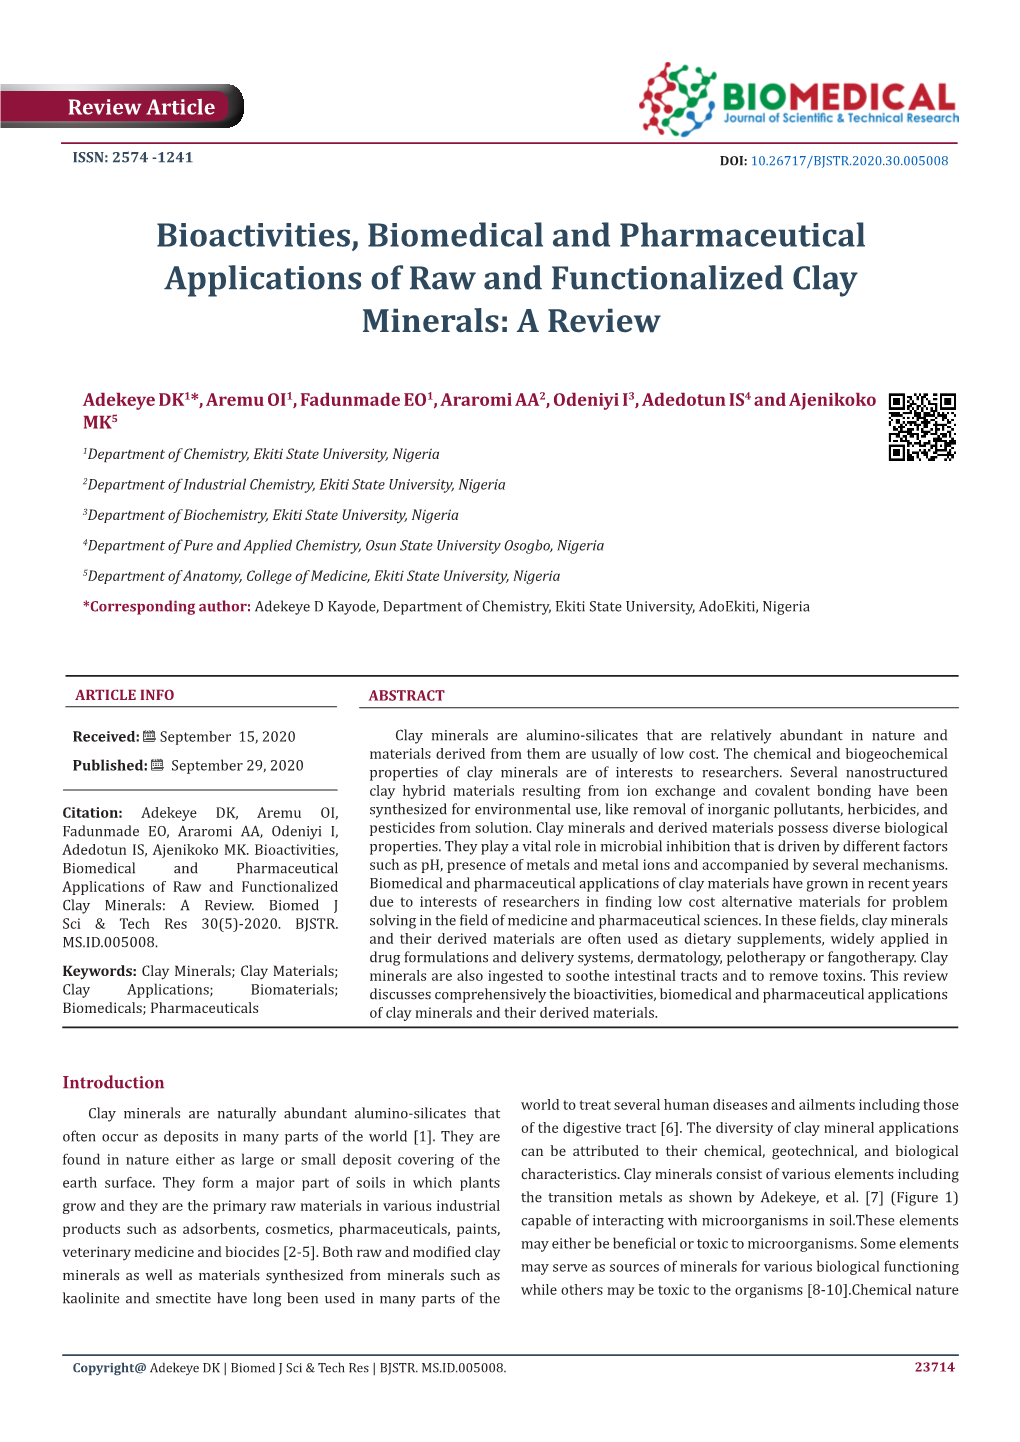 Bioactivities, Biomedical and Pharmaceutical Applications of Raw and Functionalized Clay Minerals: a Review